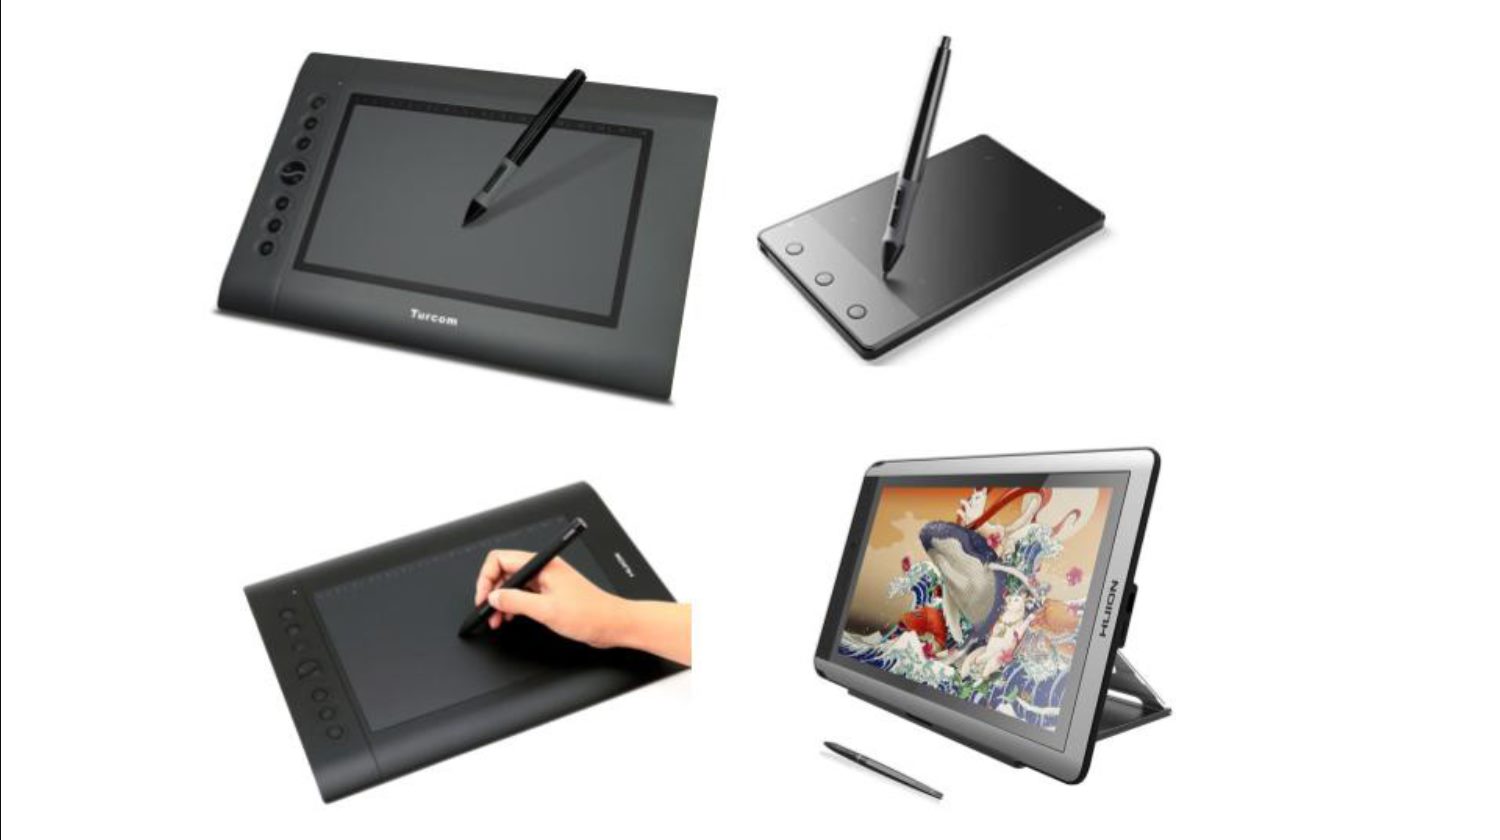 Drawing Tablet with Screen, 15.6'' XOPPOX Graphics Drawing Monitor Pen  Display with 1080P Full Laminated Screen,Tilt 8192 Levels Battery-Free